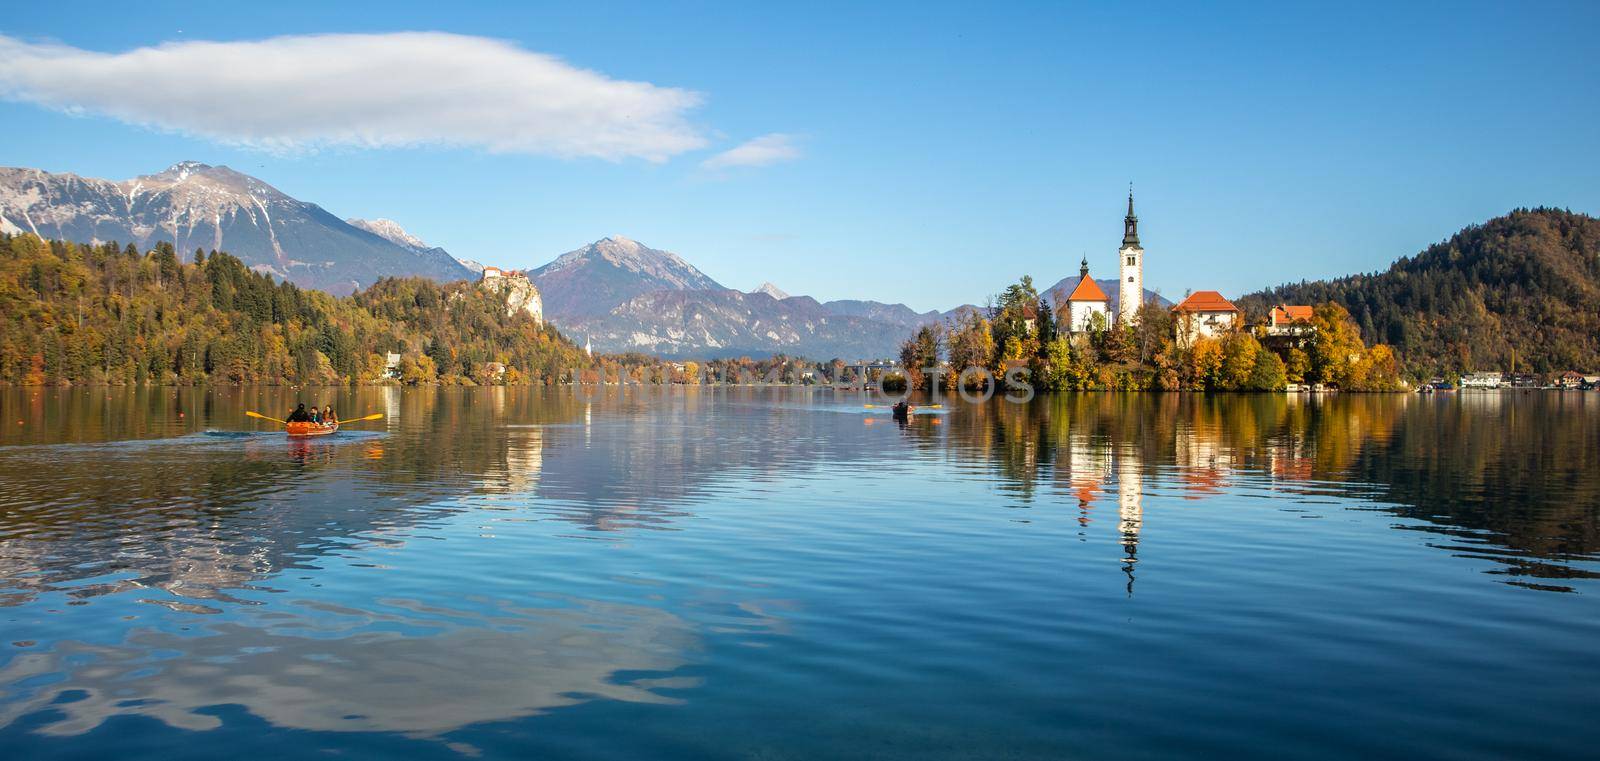 Panoramic view of Julian Alps, Lake Bled with St. Marys Church of the Assumption on the small island. Bled, Slovenia, Europe. by kasto